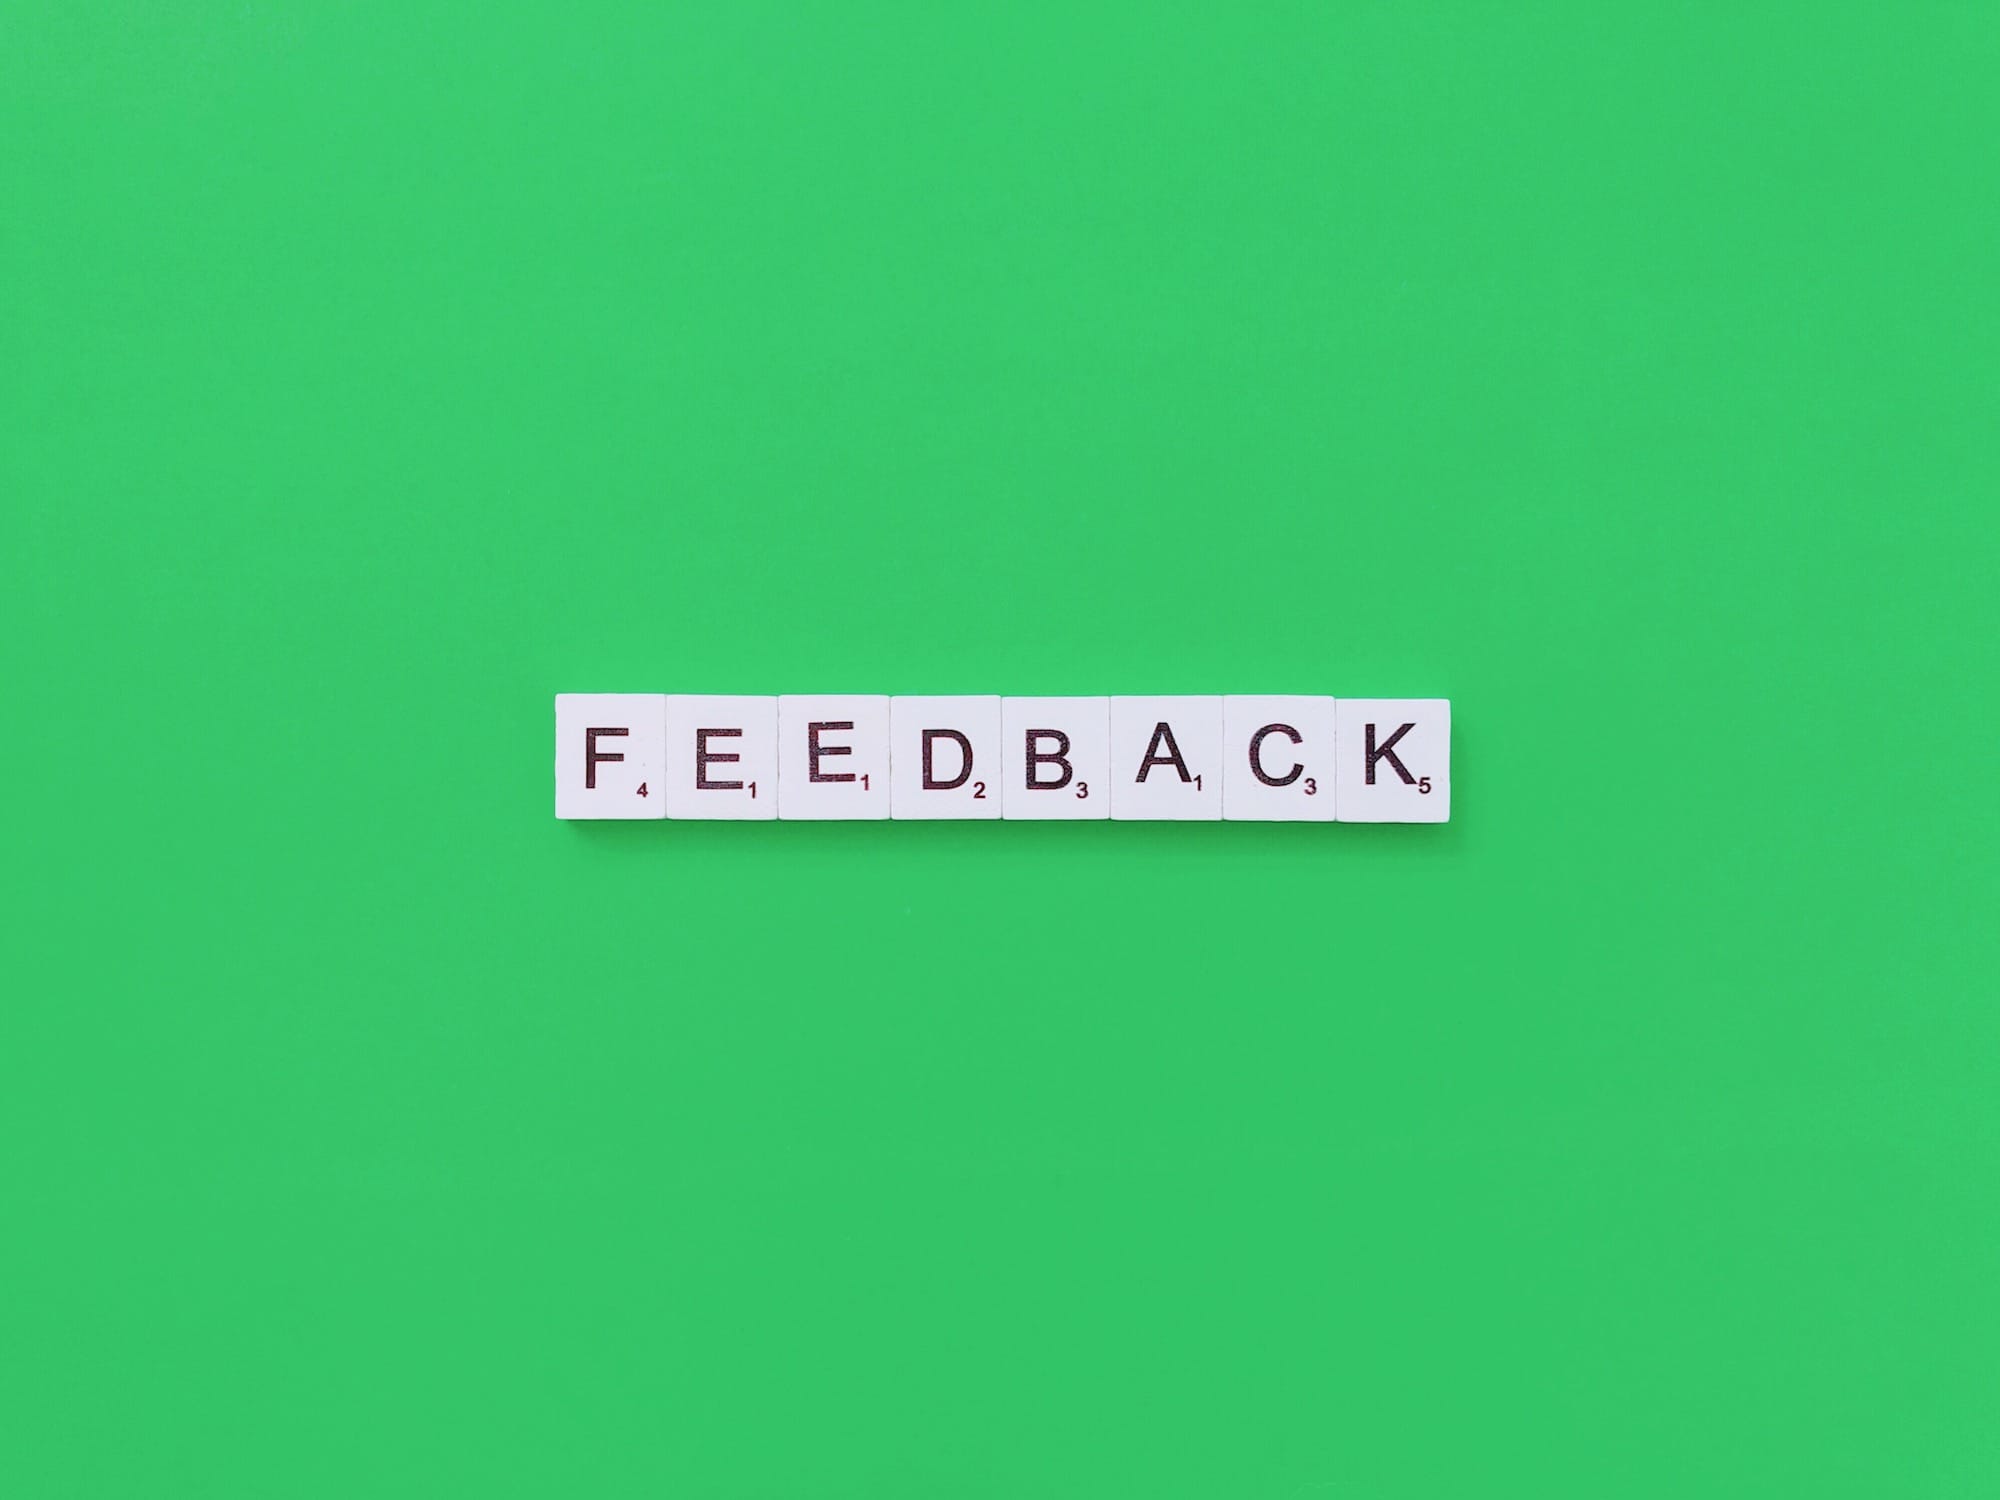 Feedback is critical in a lean startup